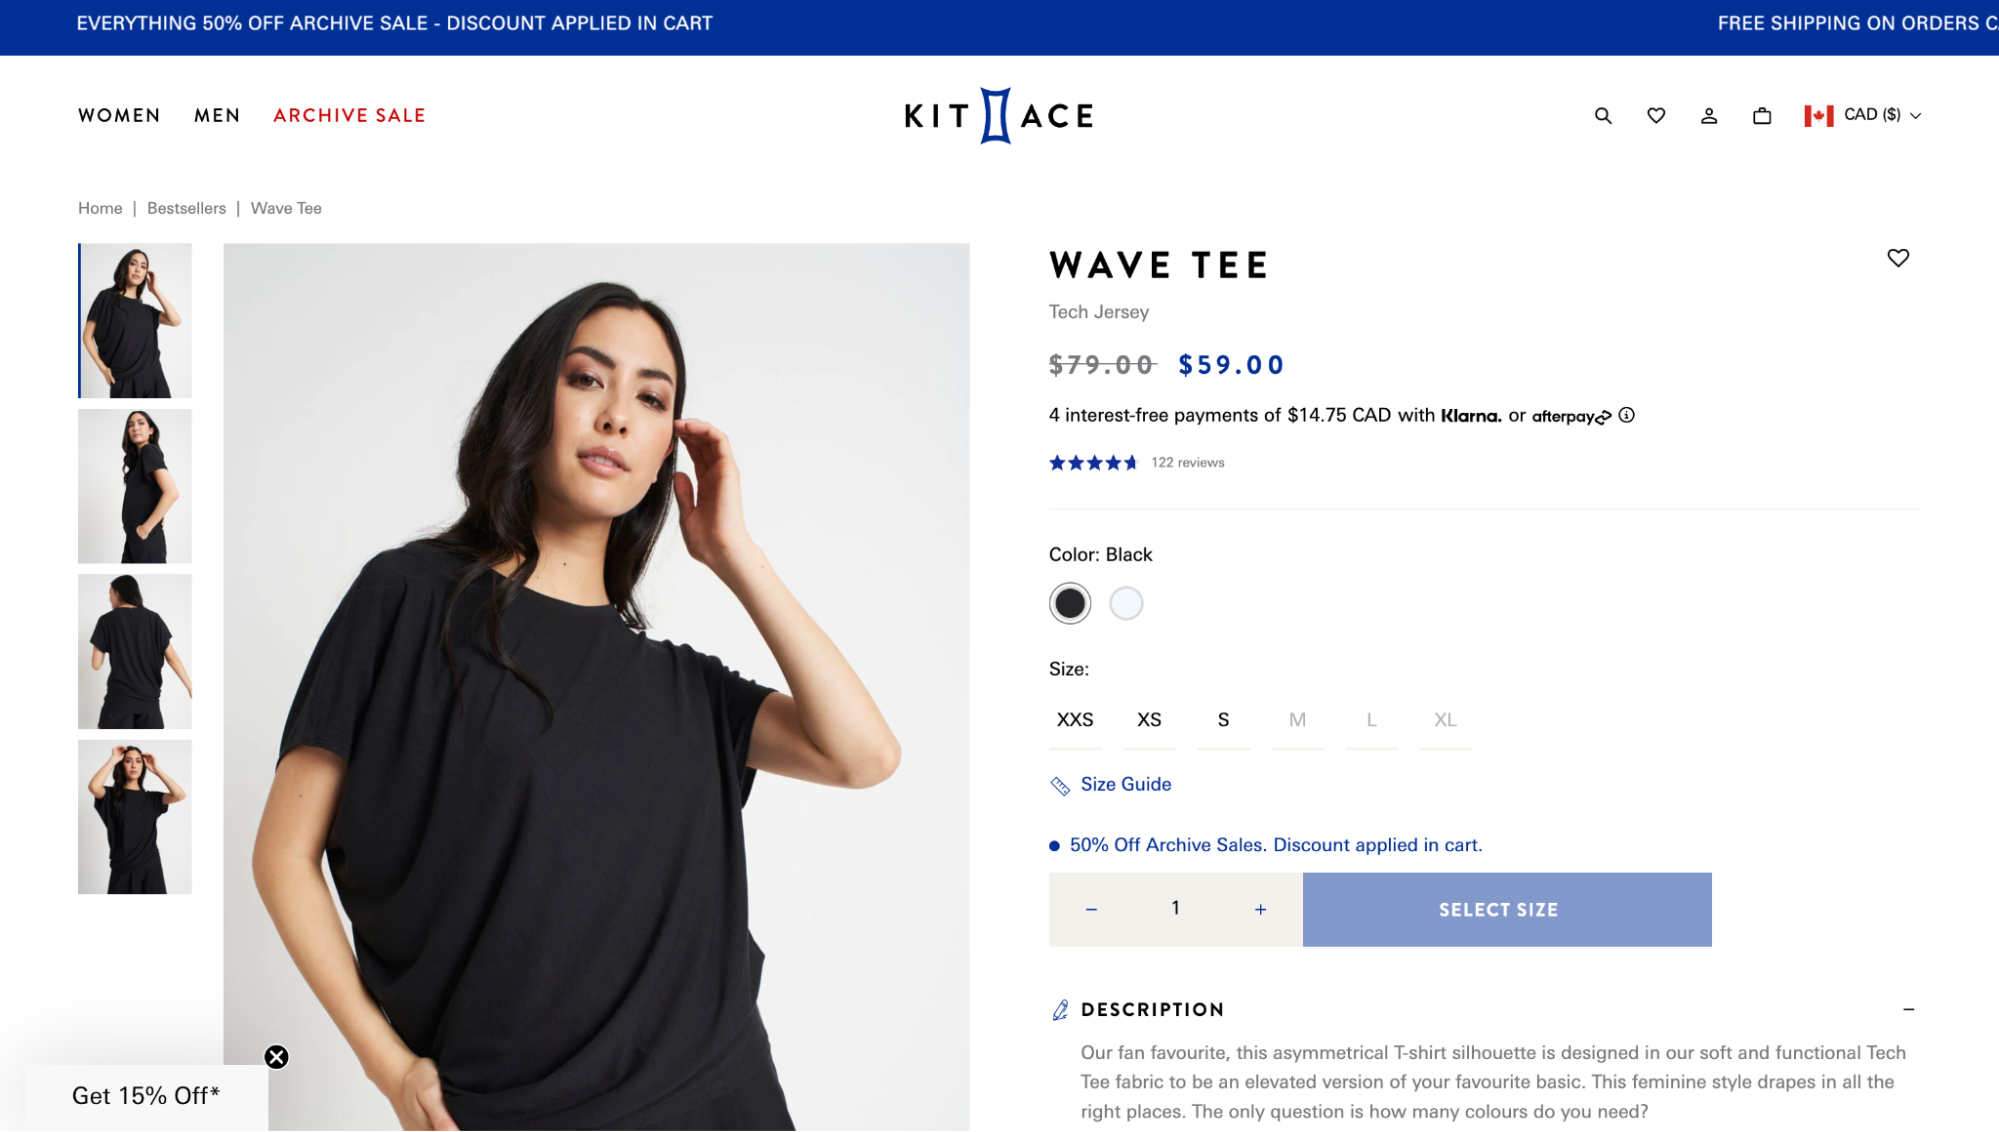 A product page for a t-shirt includes subtle discount incentives in its minimal design.